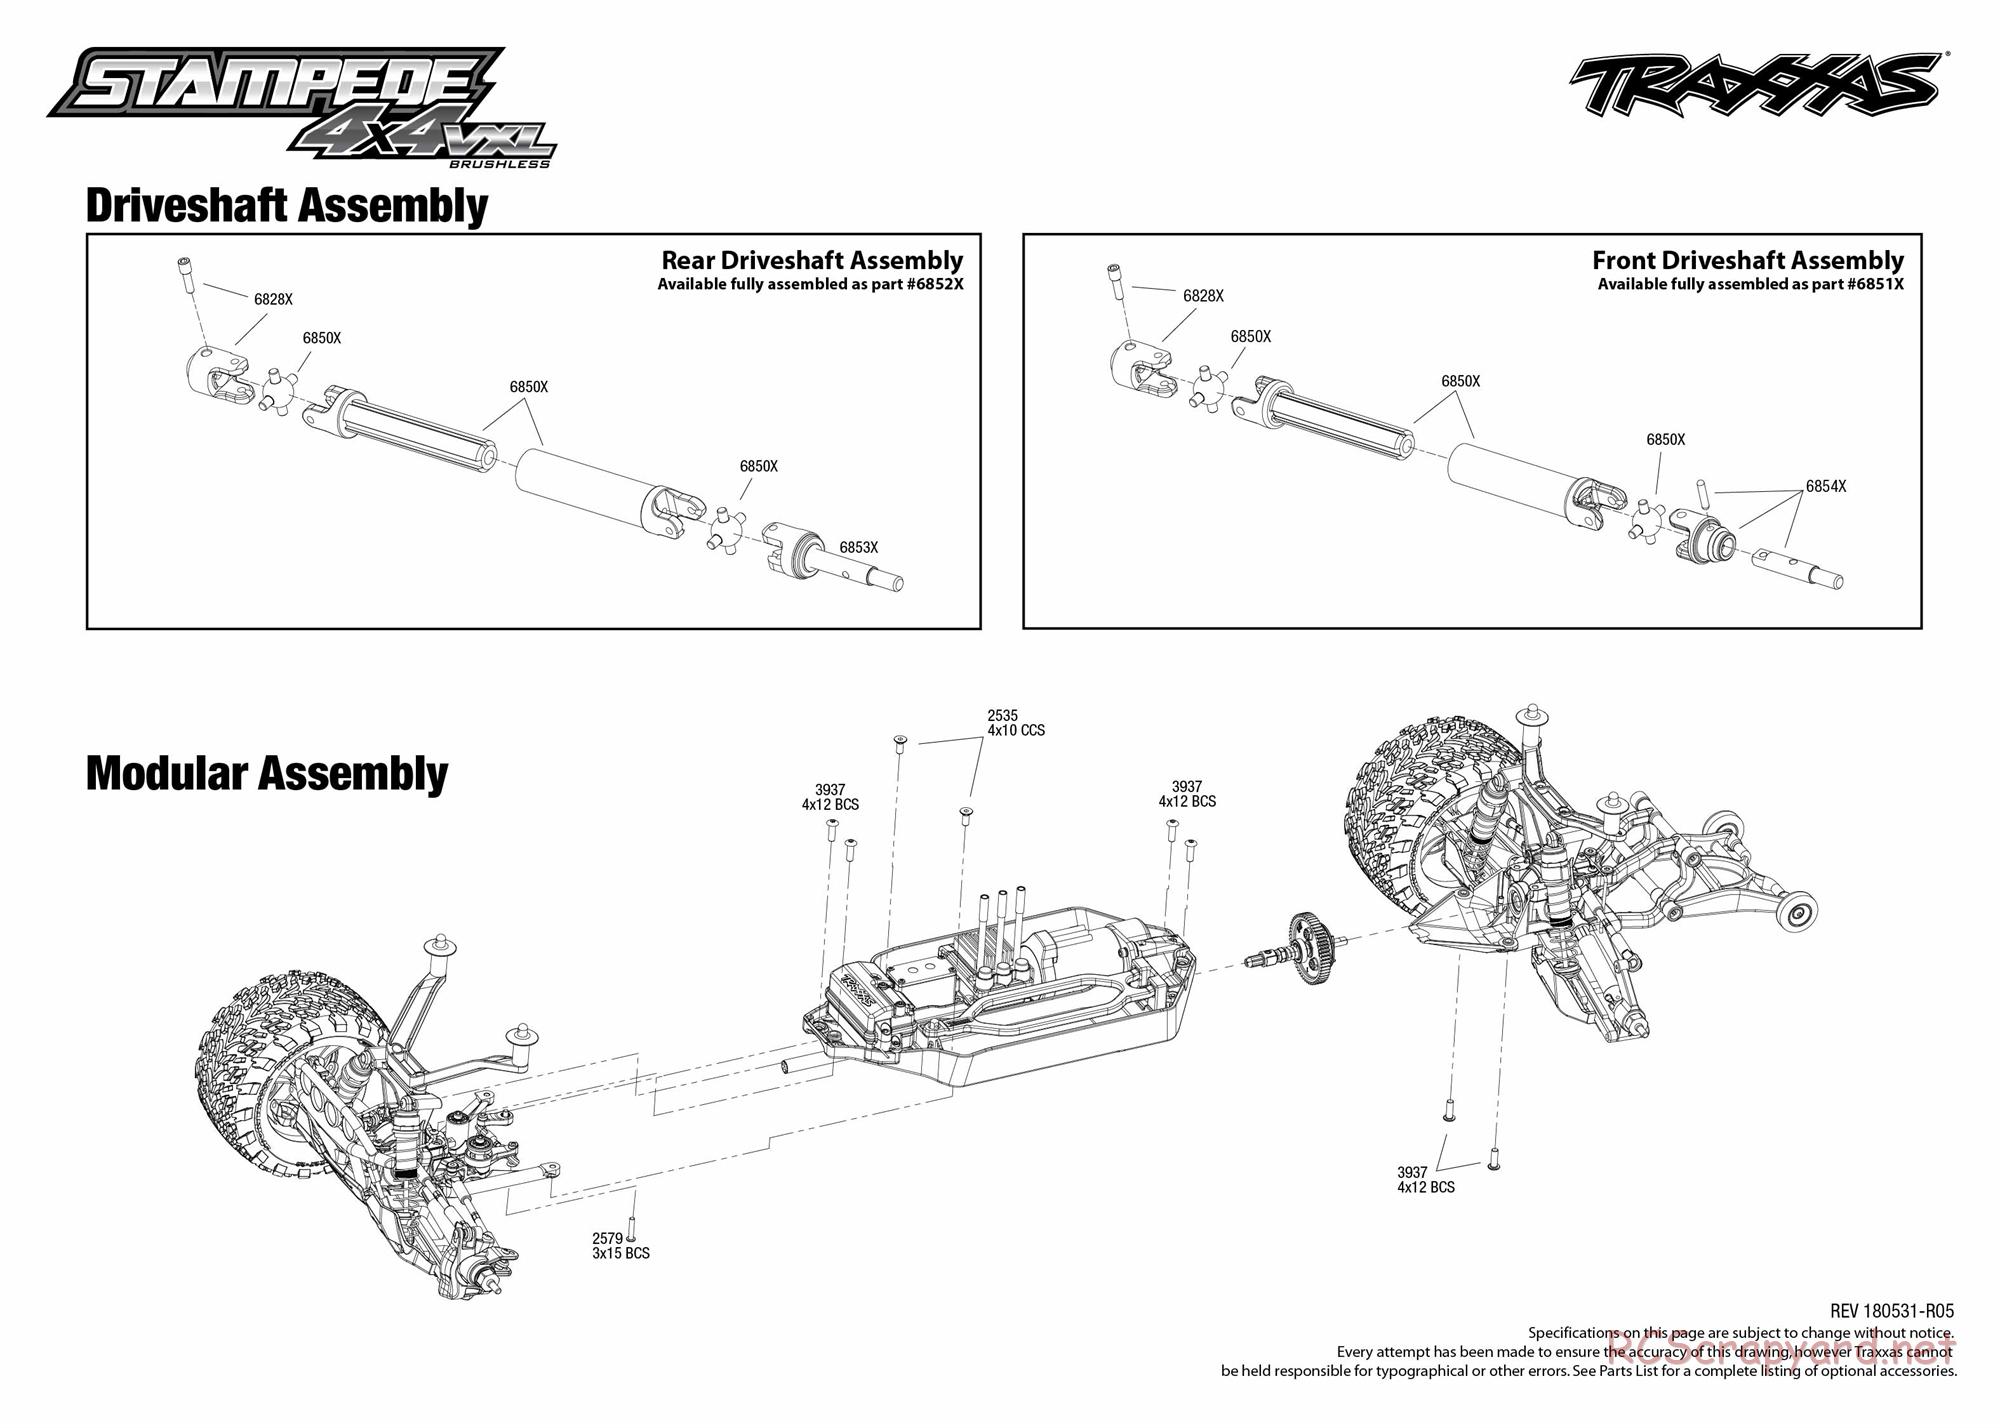 Traxxas - Stampede 4x4 VXL TSM (2015) - Exploded Views - Page 2